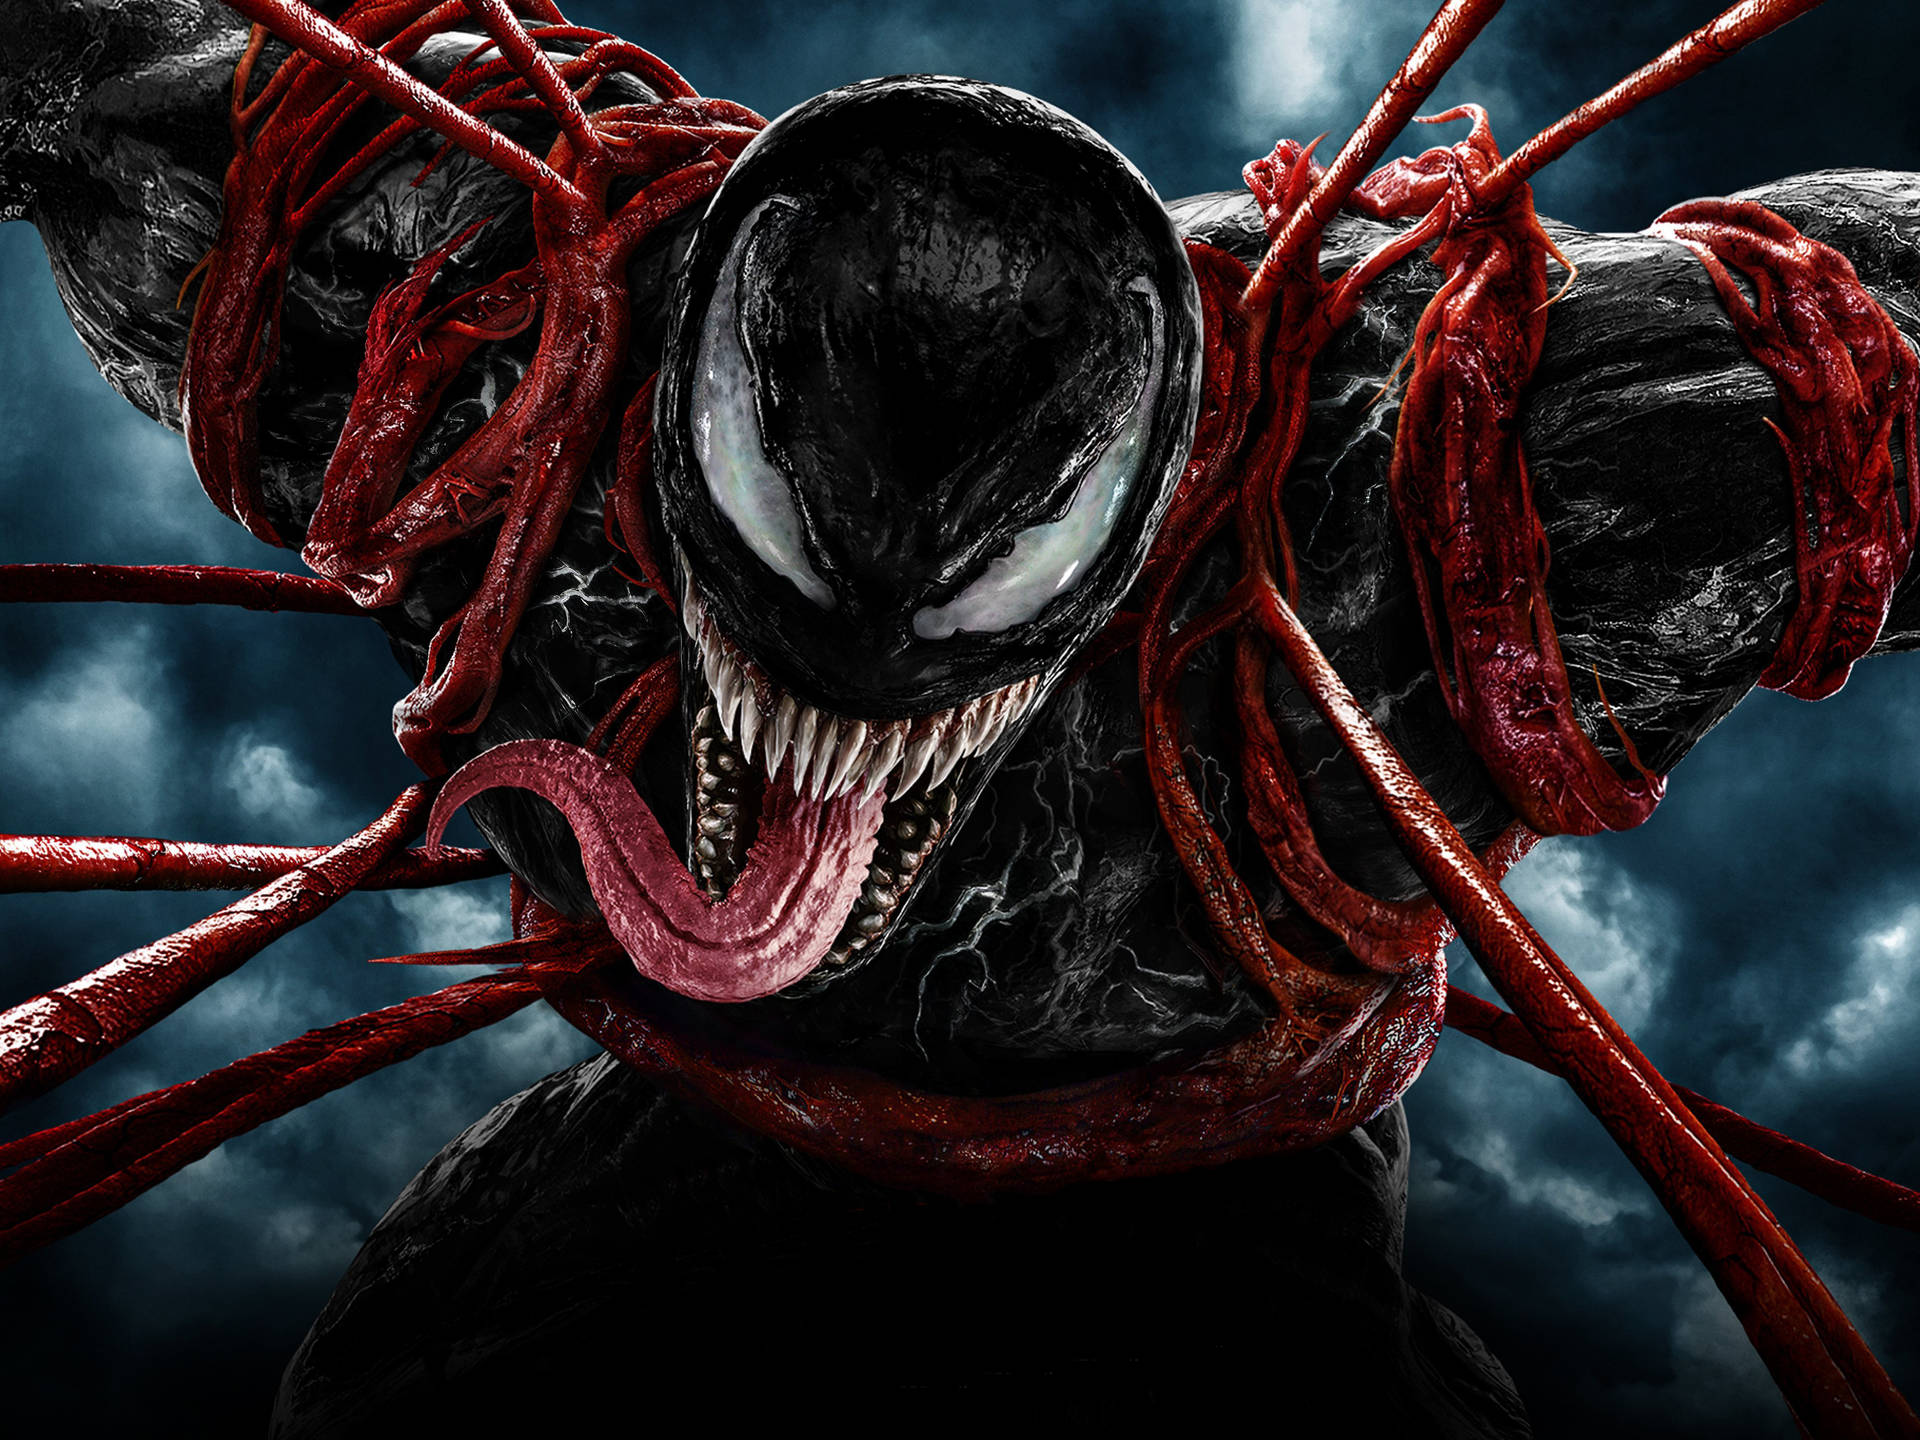 Venom Engulfed in Carnage's Arms in Full 4K Ultra HD Wallpaper